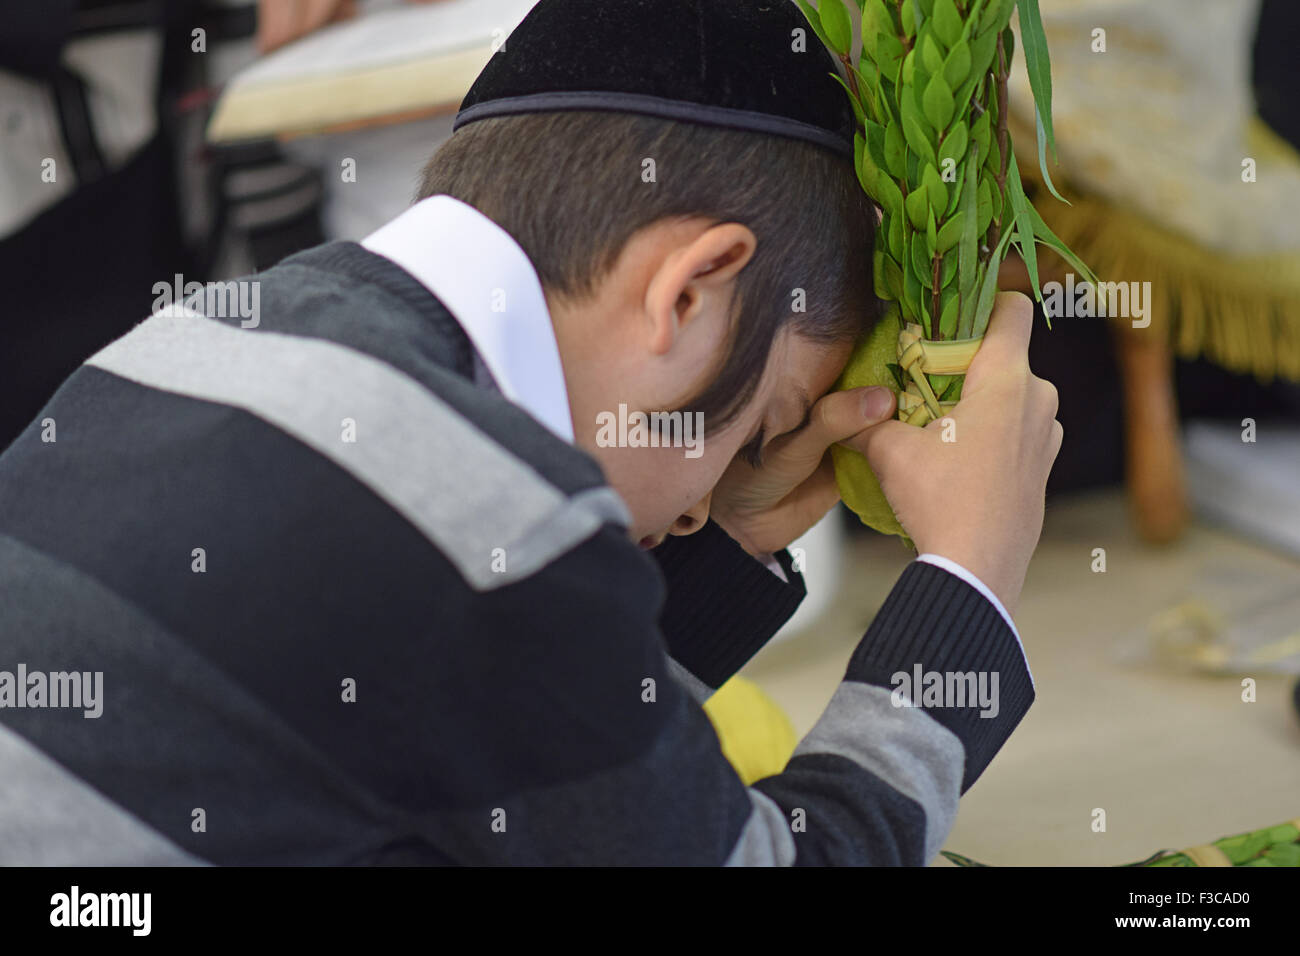 A young man holds an esrog and lulav during Sukkot morning services in a synagogue in Queens, New York Stock Photo